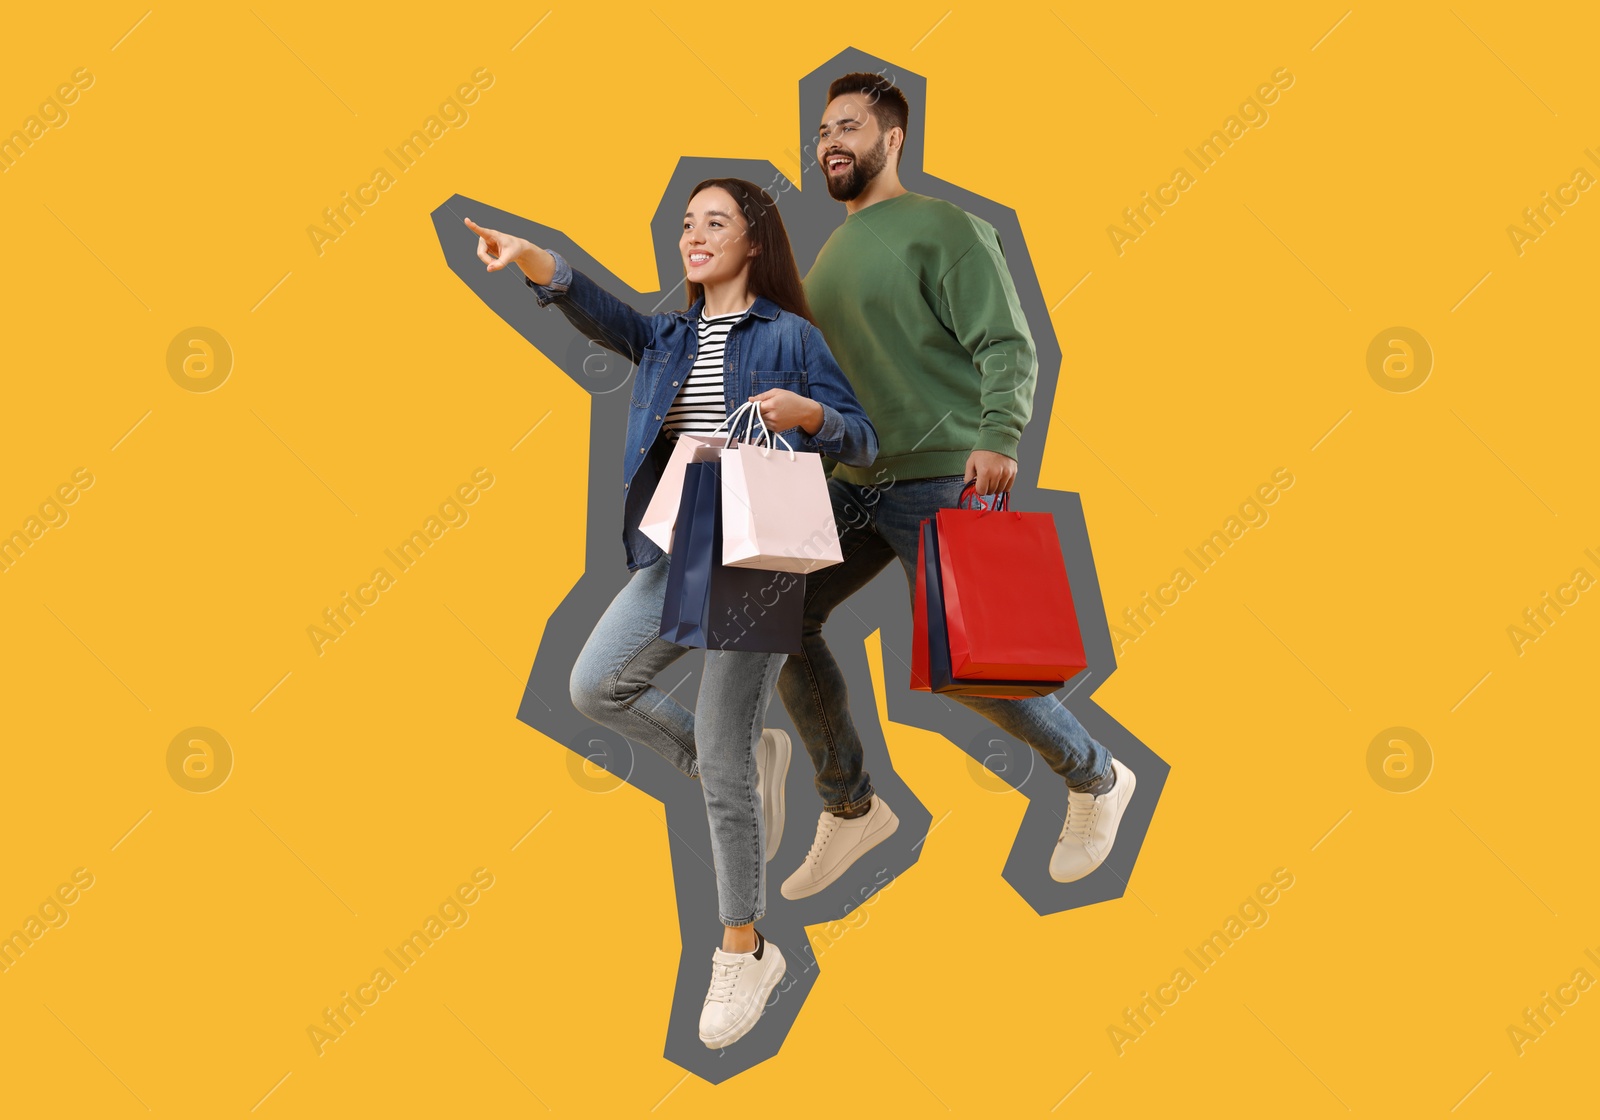 Image of Happy couple with shopping bags jumping on orange background